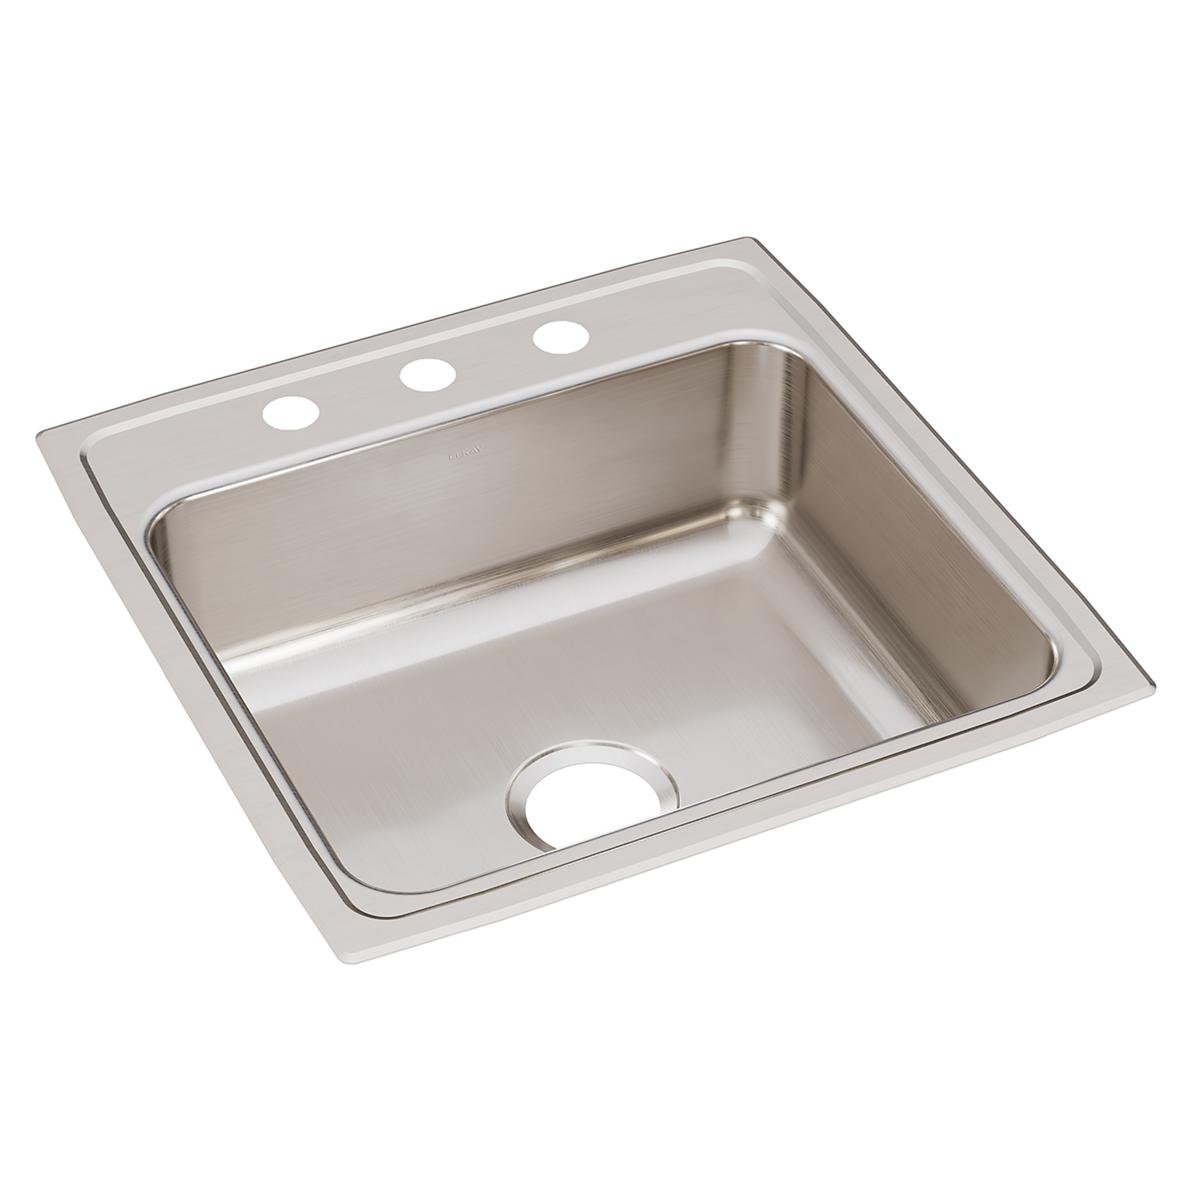 Elkay Lustertone Classic 22" x 22" x 7-5/8" Single Bowl Drop-in Sink with Quick-clip